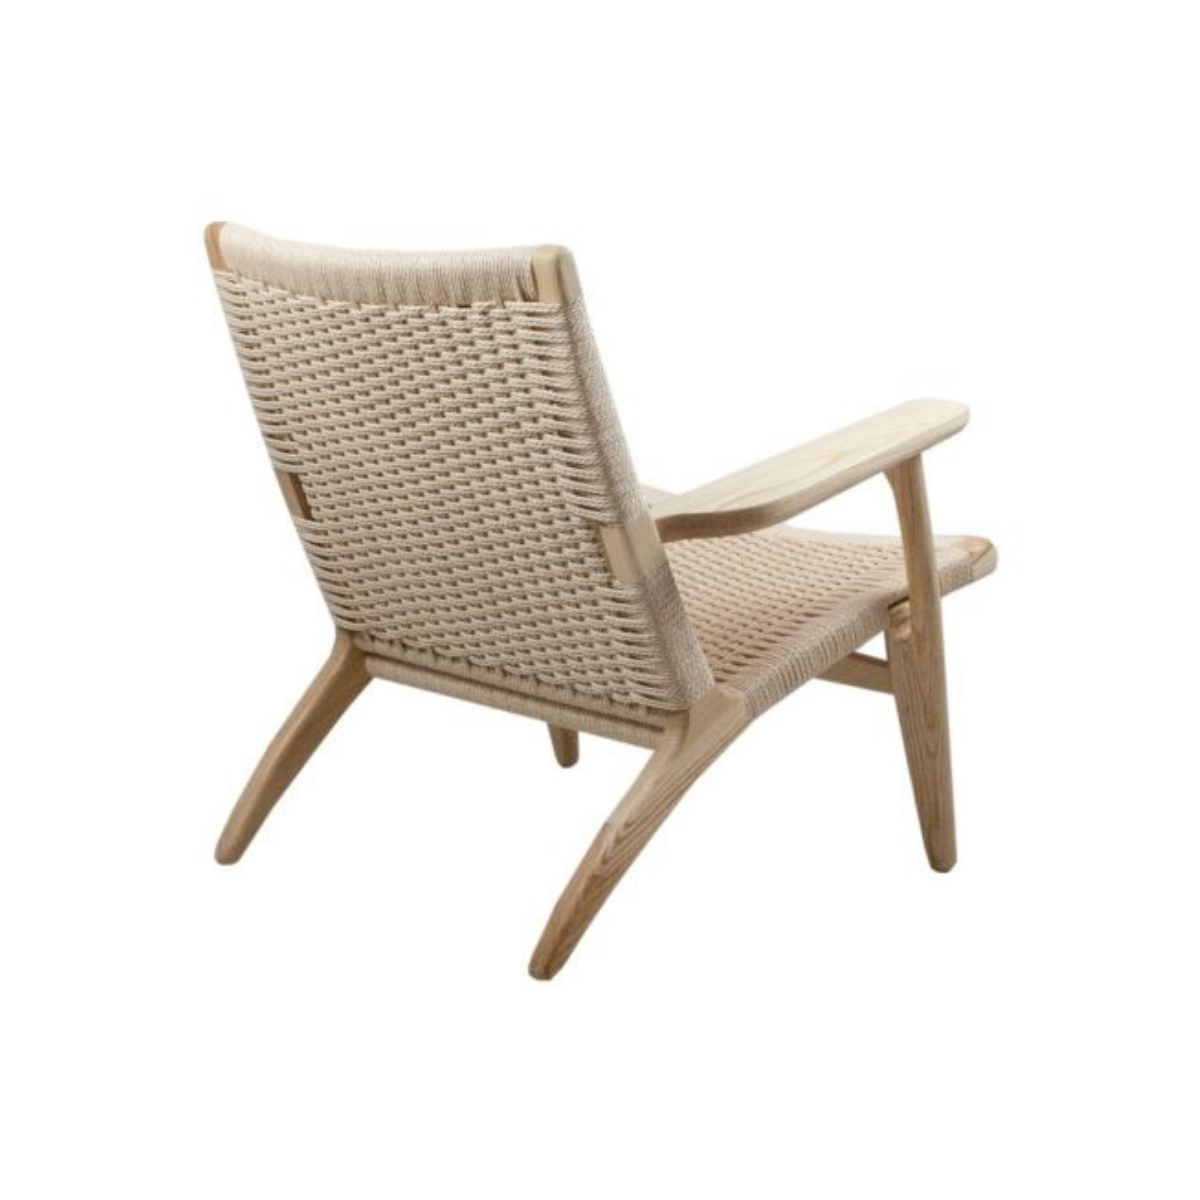 Cavo Lounge Chair - Natural (6733327794278)